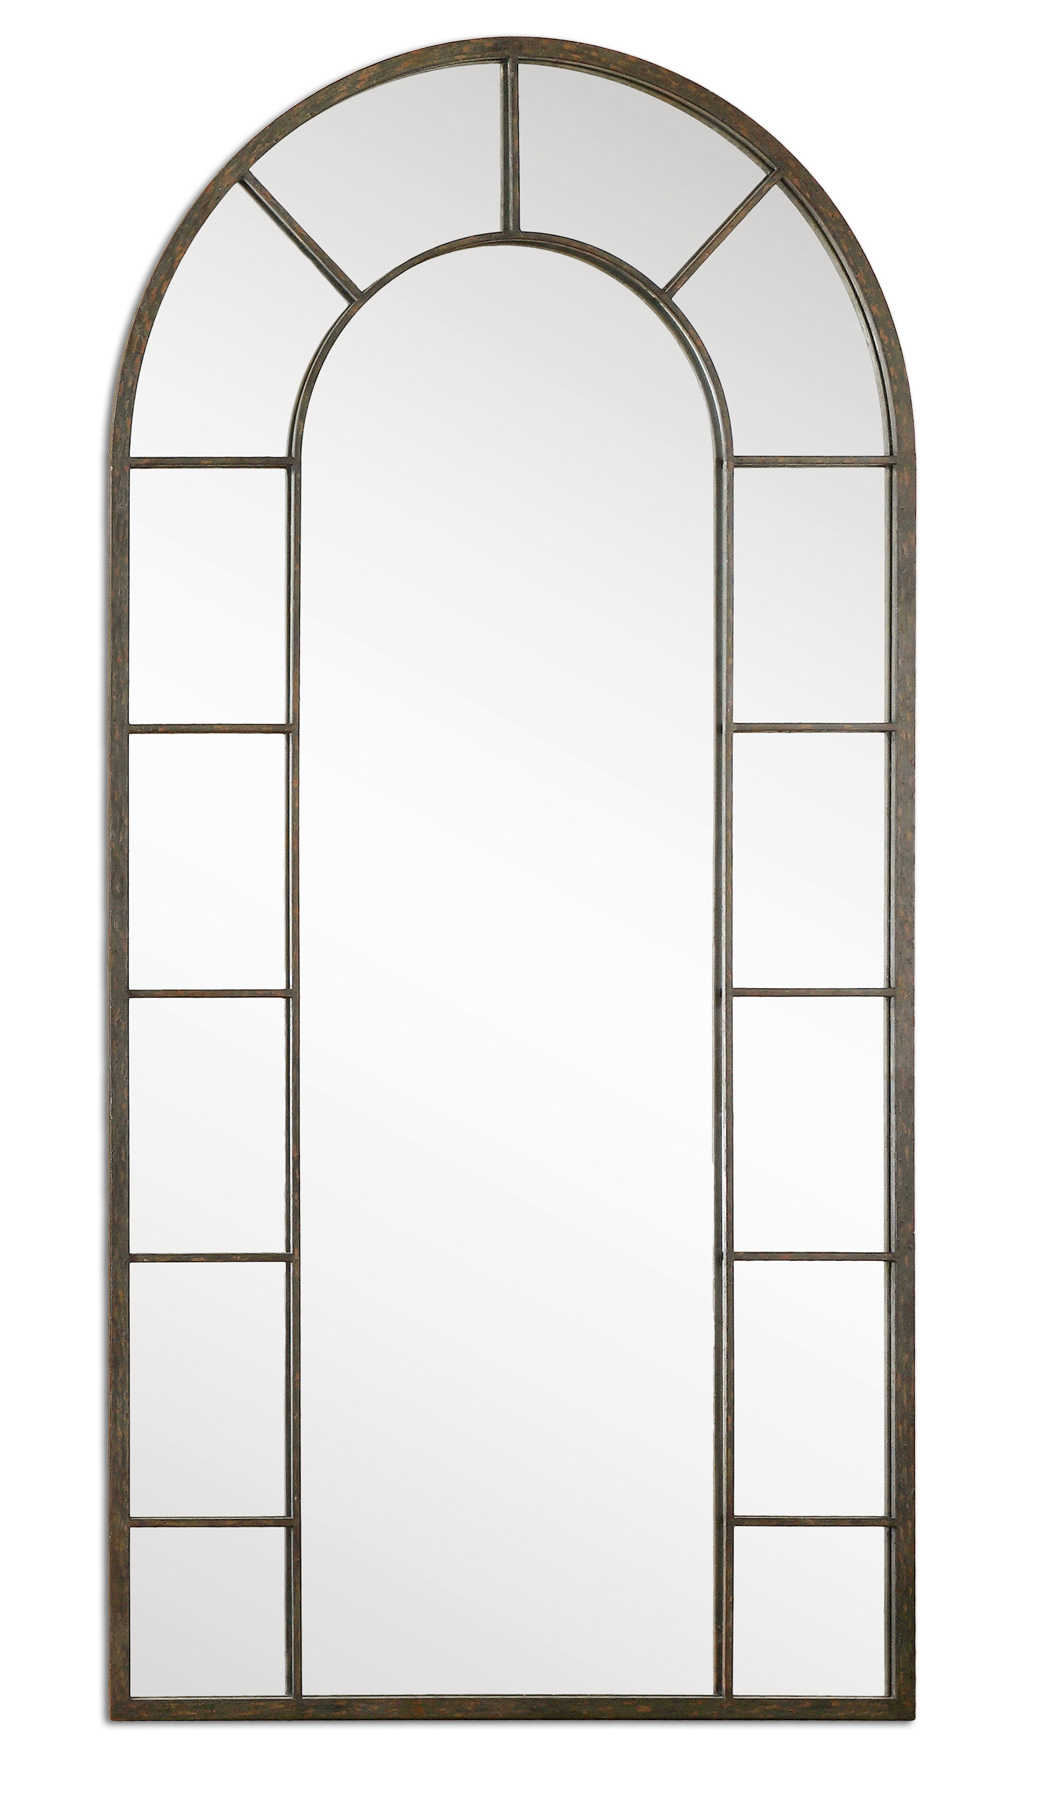 DILLINGHAM ARCHED MIRROR